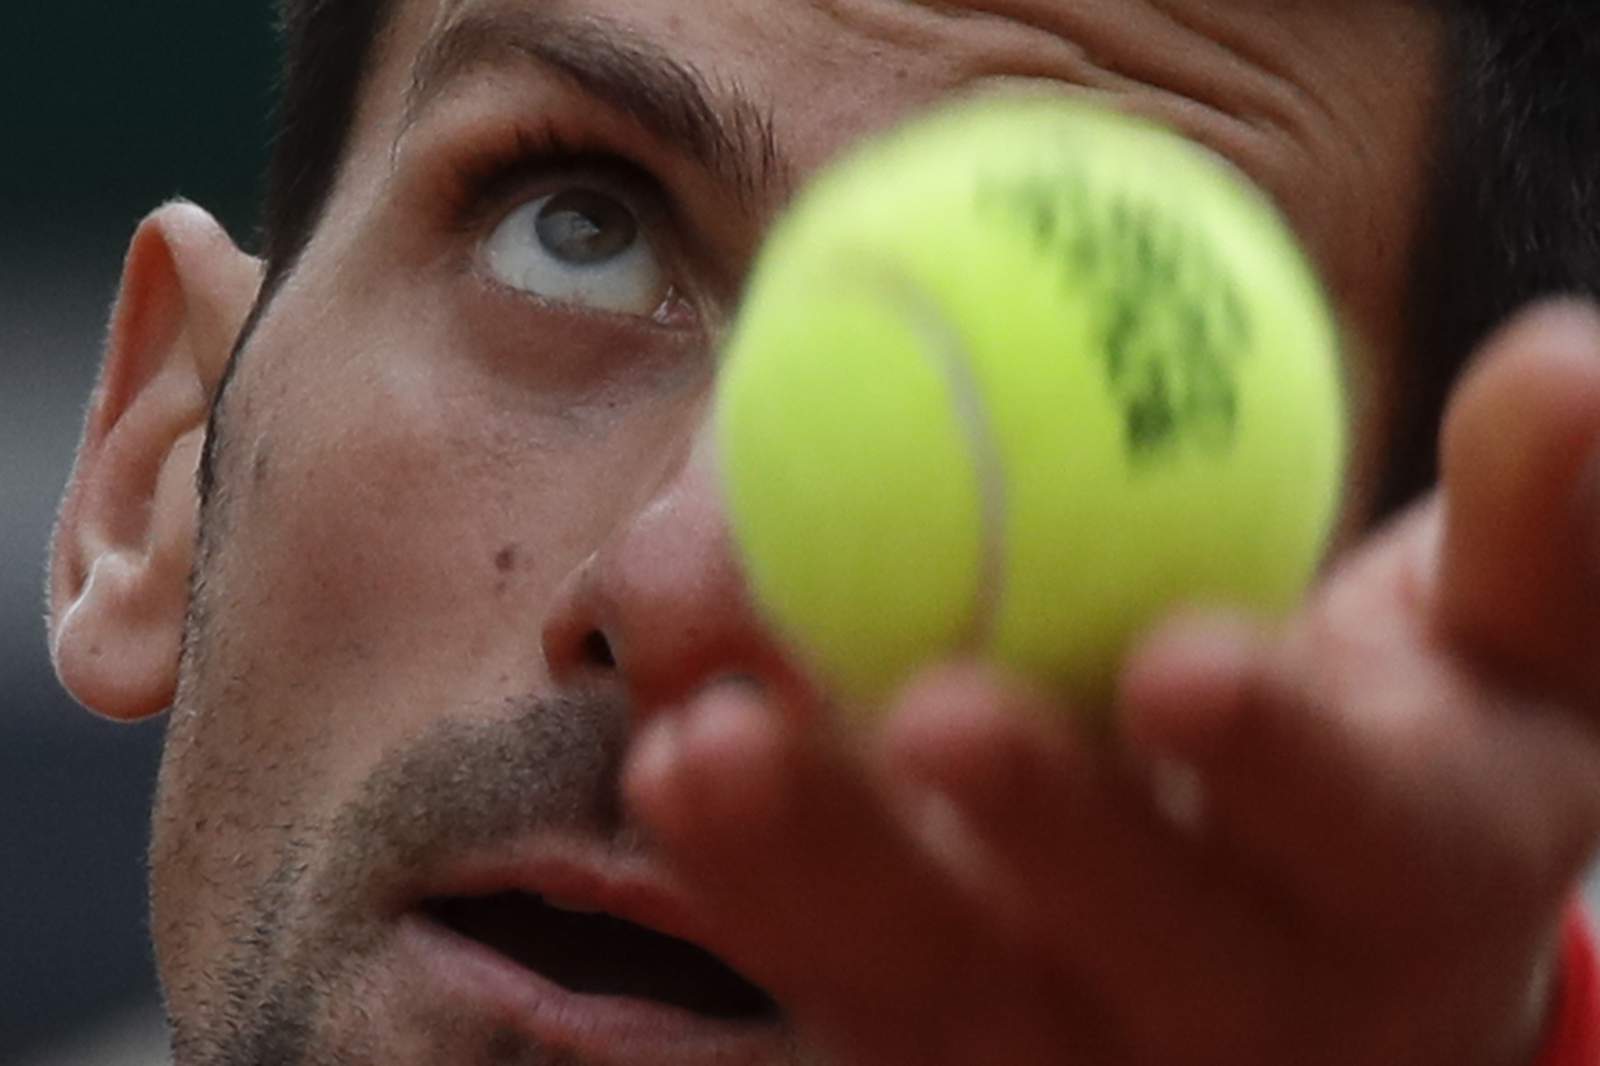 Does Djokovic's next foe have hope? 'I was wondering that'